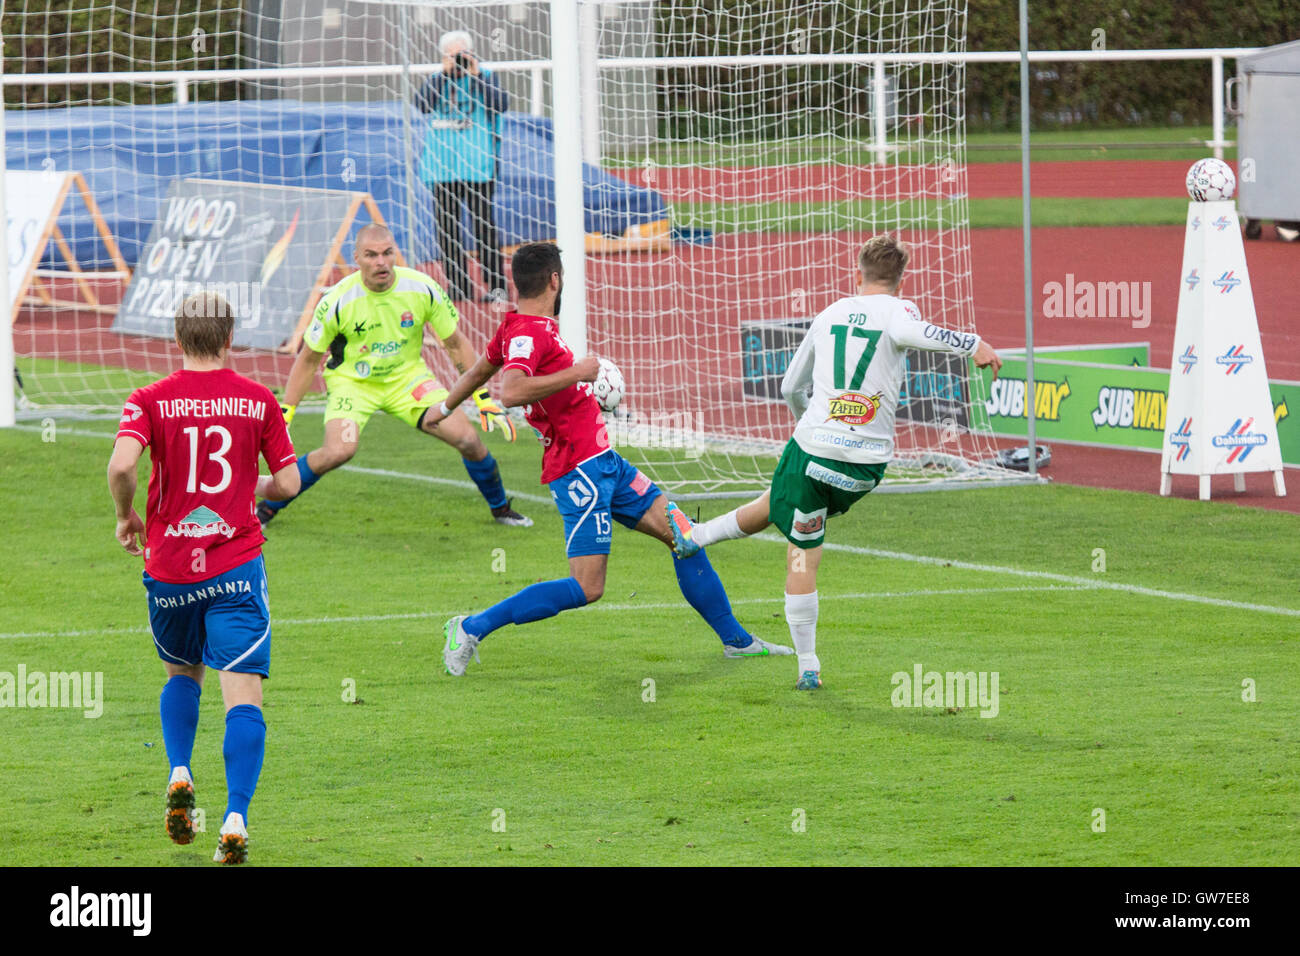 Wiklöf Holding Arena, Mariehamn, Åland, Finland, September 12 2016. The Åland archipelago team IFK Mariehamn are in a strong position to win the top league in Finnish football for the first time in their history after beating PS Kemi Kings 1-0 at home as their main rivals HJK lost heavily 4-1. Pictured: Robin Sid gets a shot away. Picture: Rob Watkins/Alamy News Stock Photo